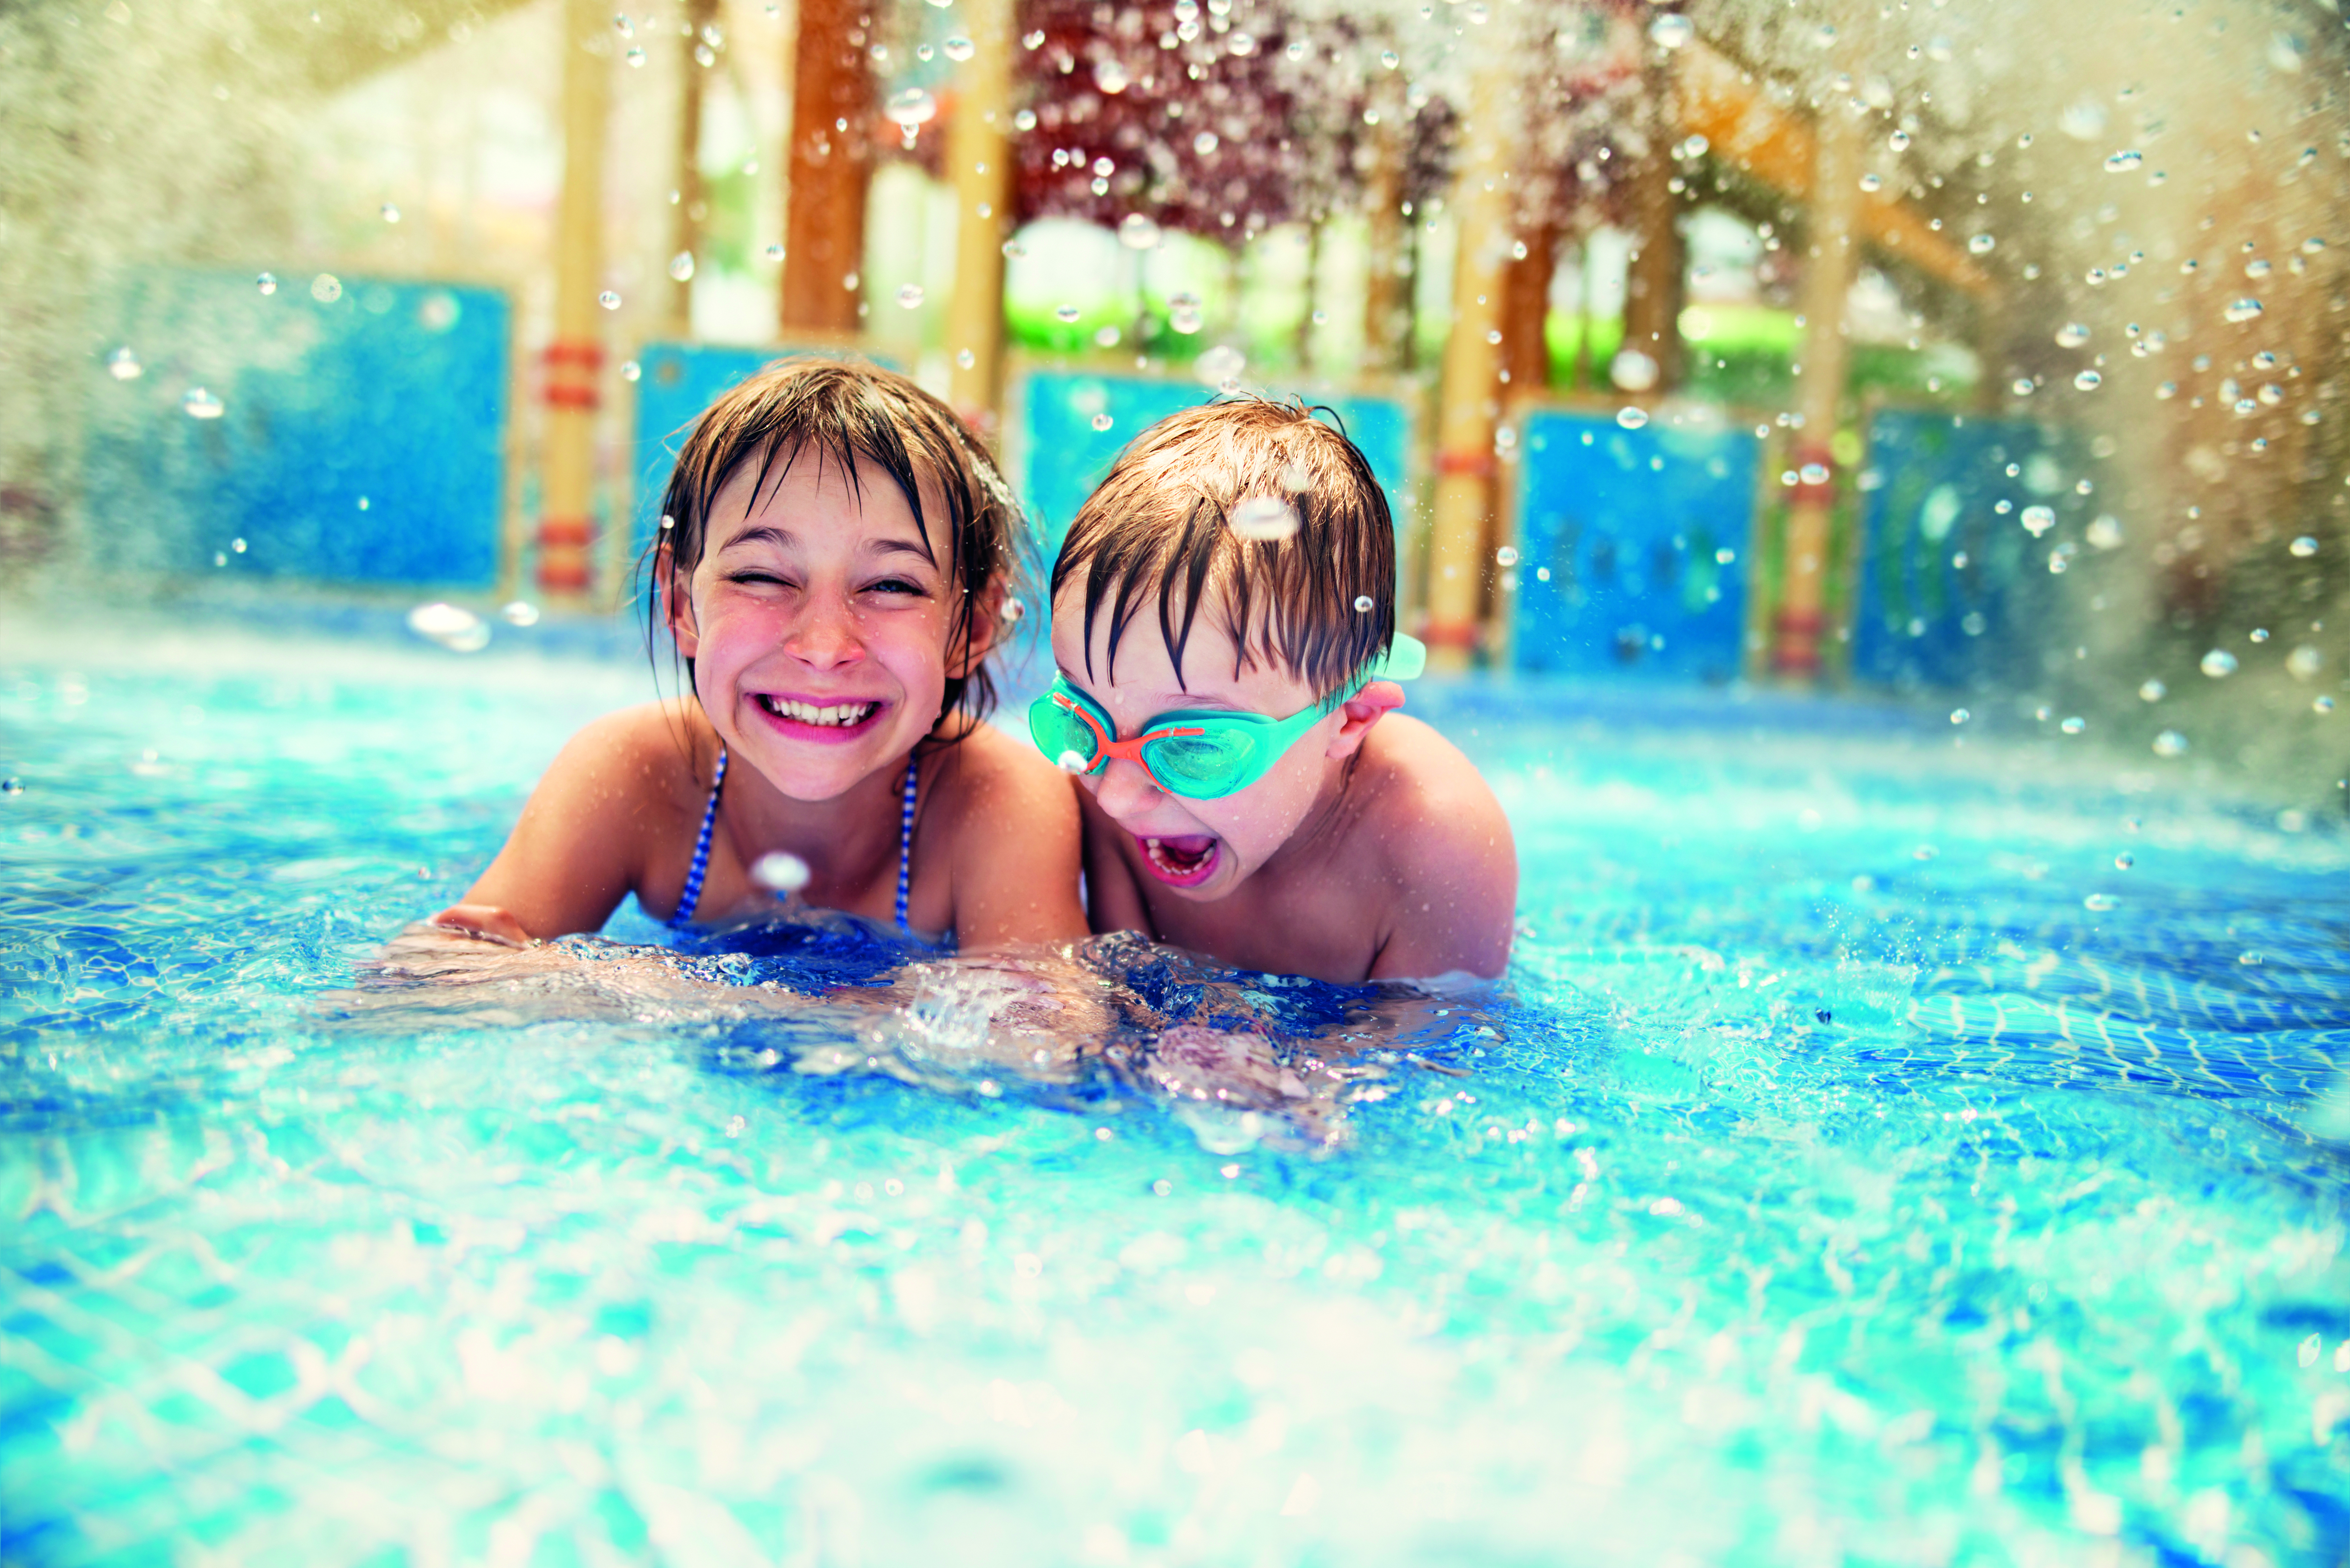 The outdoor swimming pool is a hallmark of Minnesota summers, and can be a great way for kids to burn off some energy and beat the heat. If your kids are spending a lot of time at an at-home pool (whether your own or a friend’s) this summer, be sure to protect their teeth with these tips: